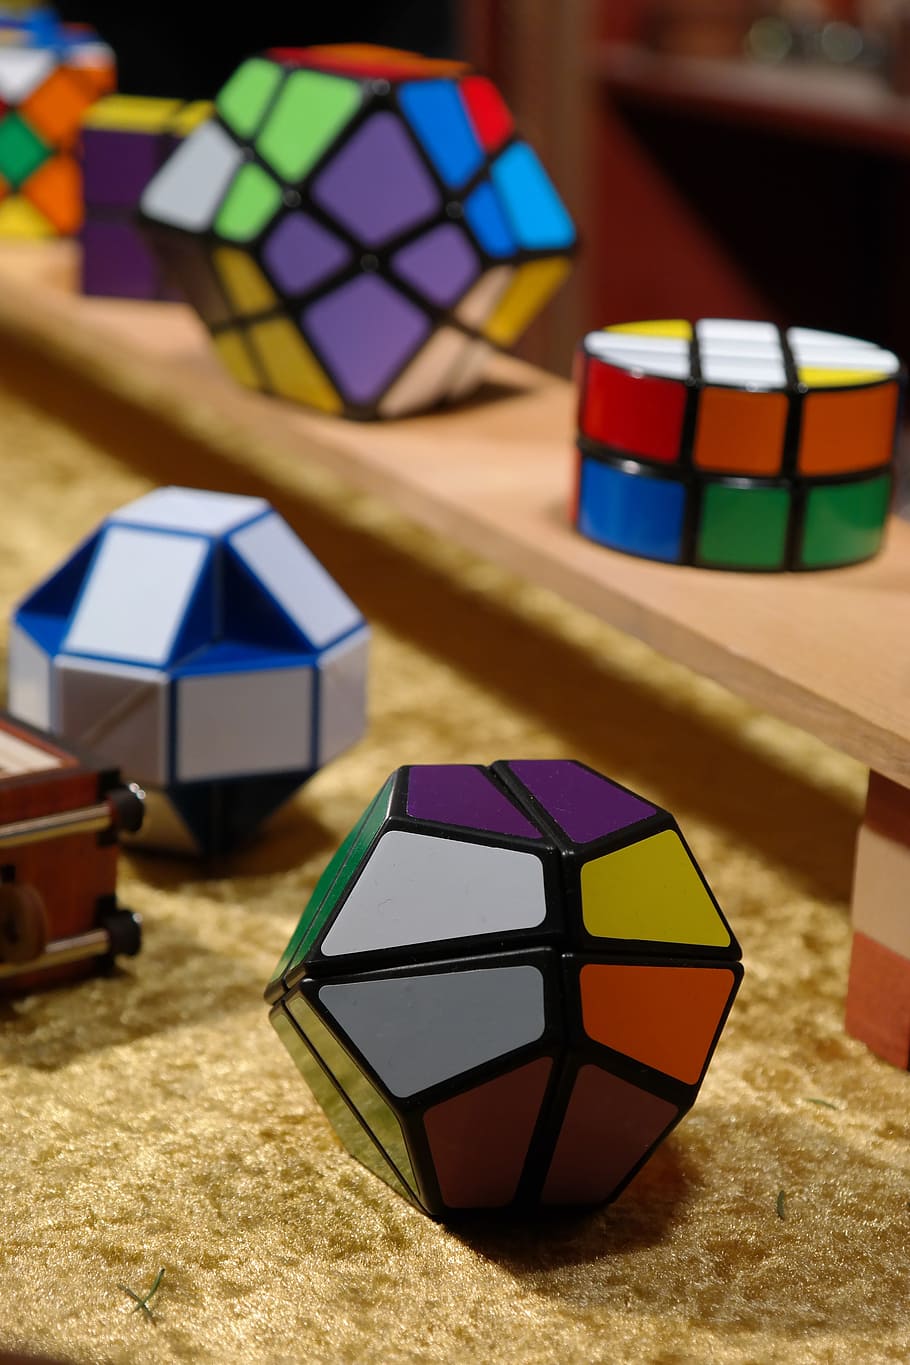 magic cube, patience games, puzzle, tricky, toys, puzzle piece, play, metal, runaway, difficult